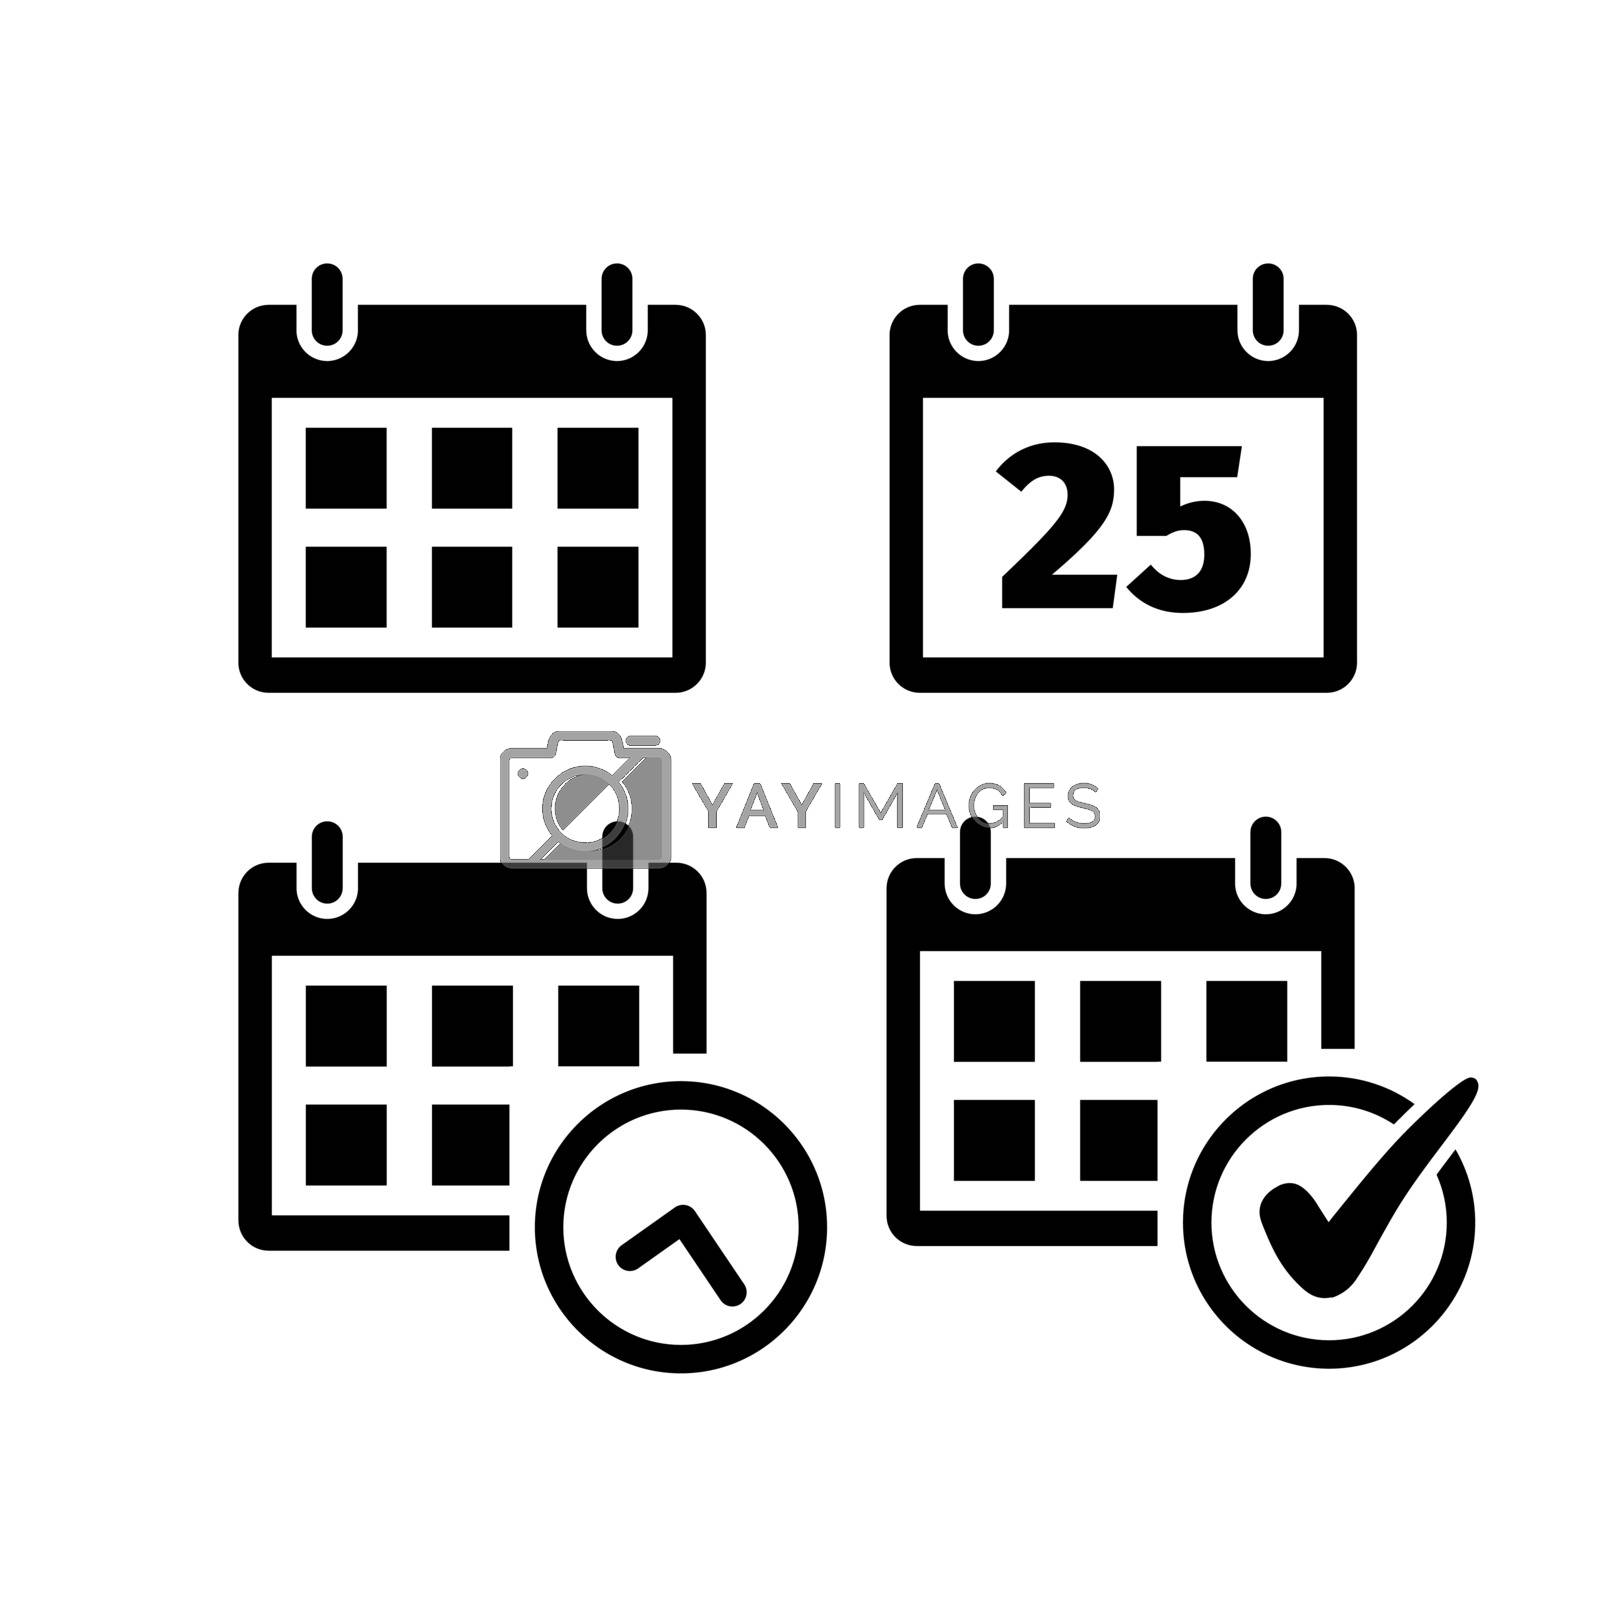 Royalty free image of Calendar icon set in flat style on white. by veronawinner